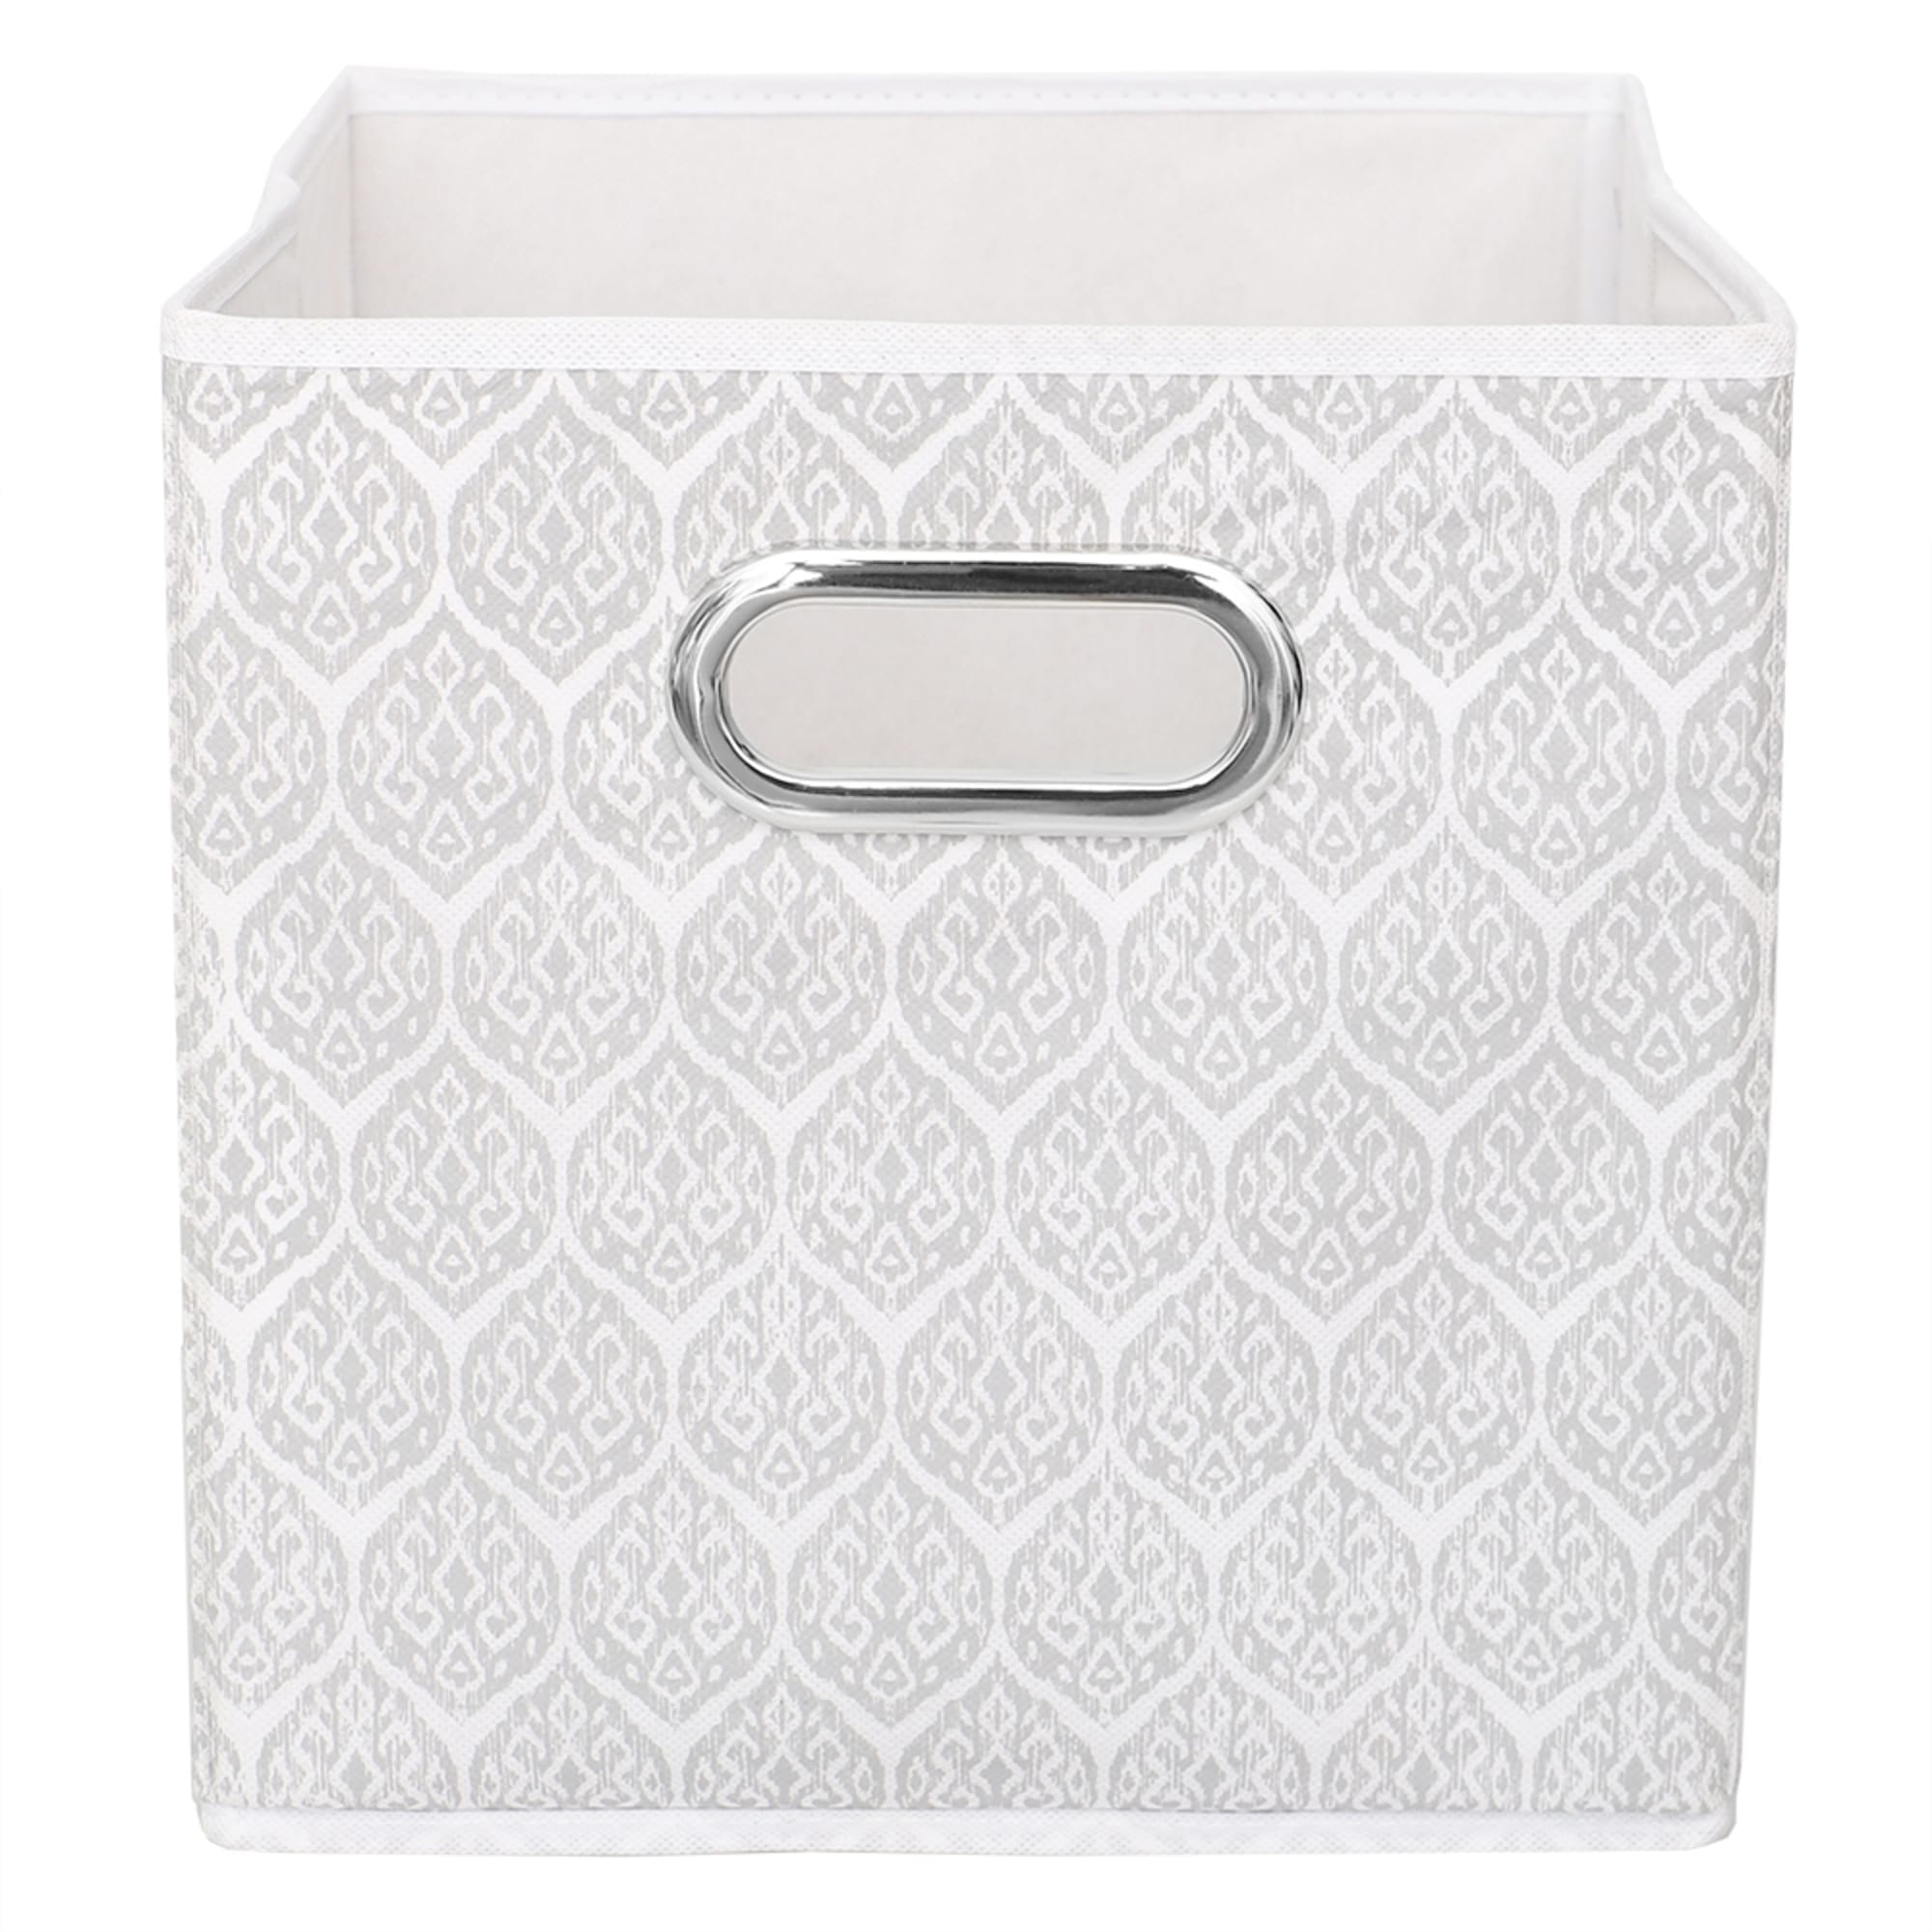 Home Basics Ikat Collapsible Non-Woven Storage Bin with Grommet Handle, Grey $5.00 EACH, CASE PACK OF 12